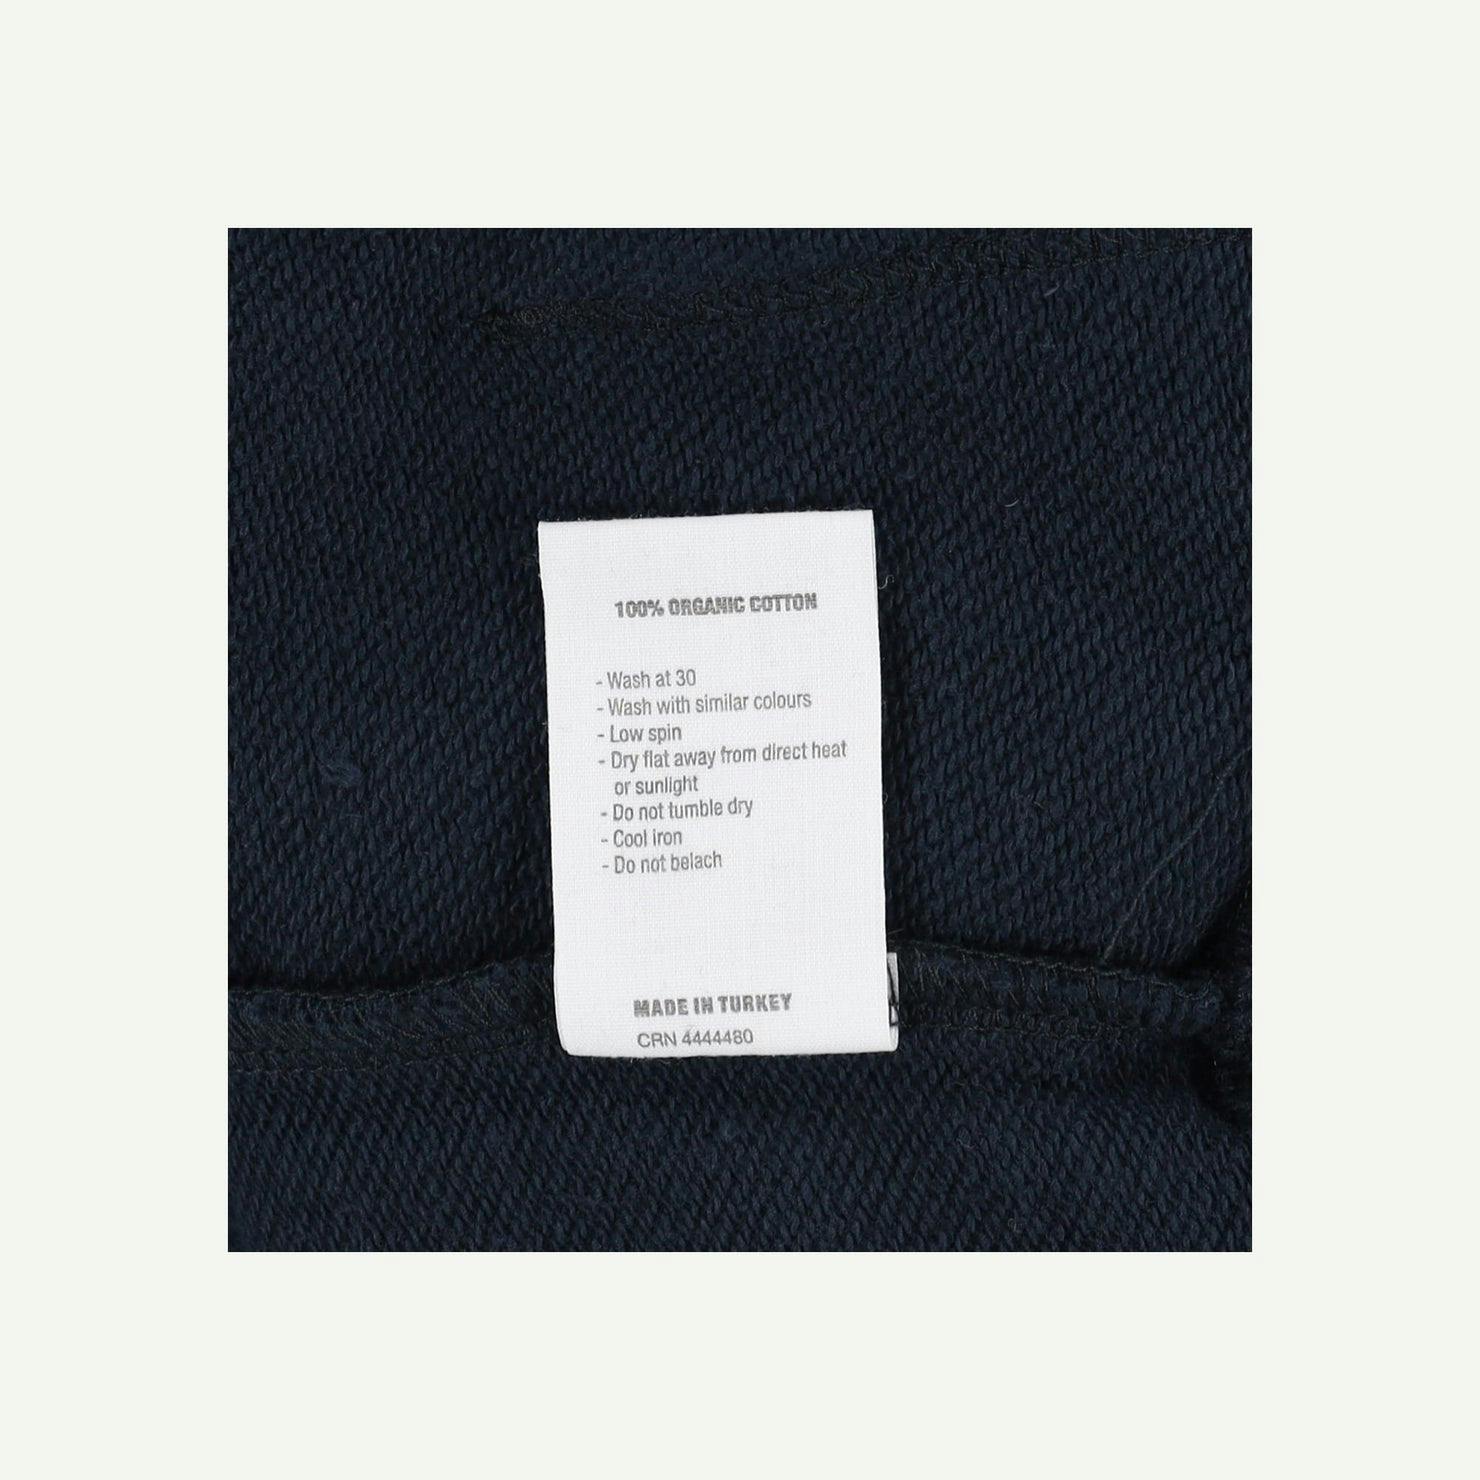 Finisterre As new Blue Hoodie